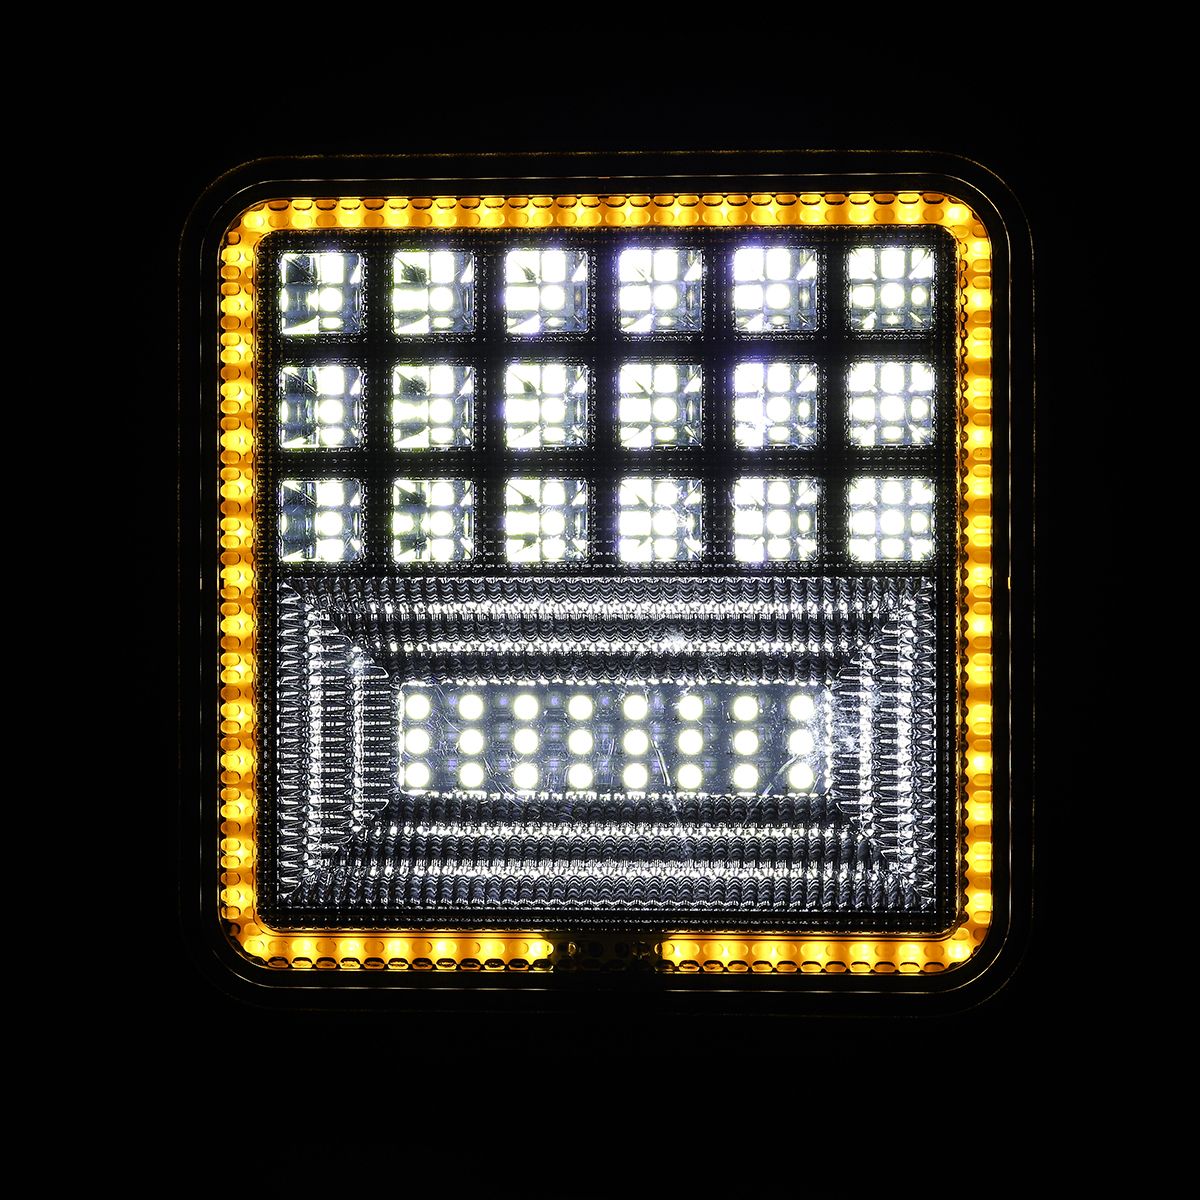 Universal-Car-LED-Work-Light-Vehicle-Spotlight-Lamp-Square-200W-6000K-8000LM-Waterproof-For-Off-road-1660017